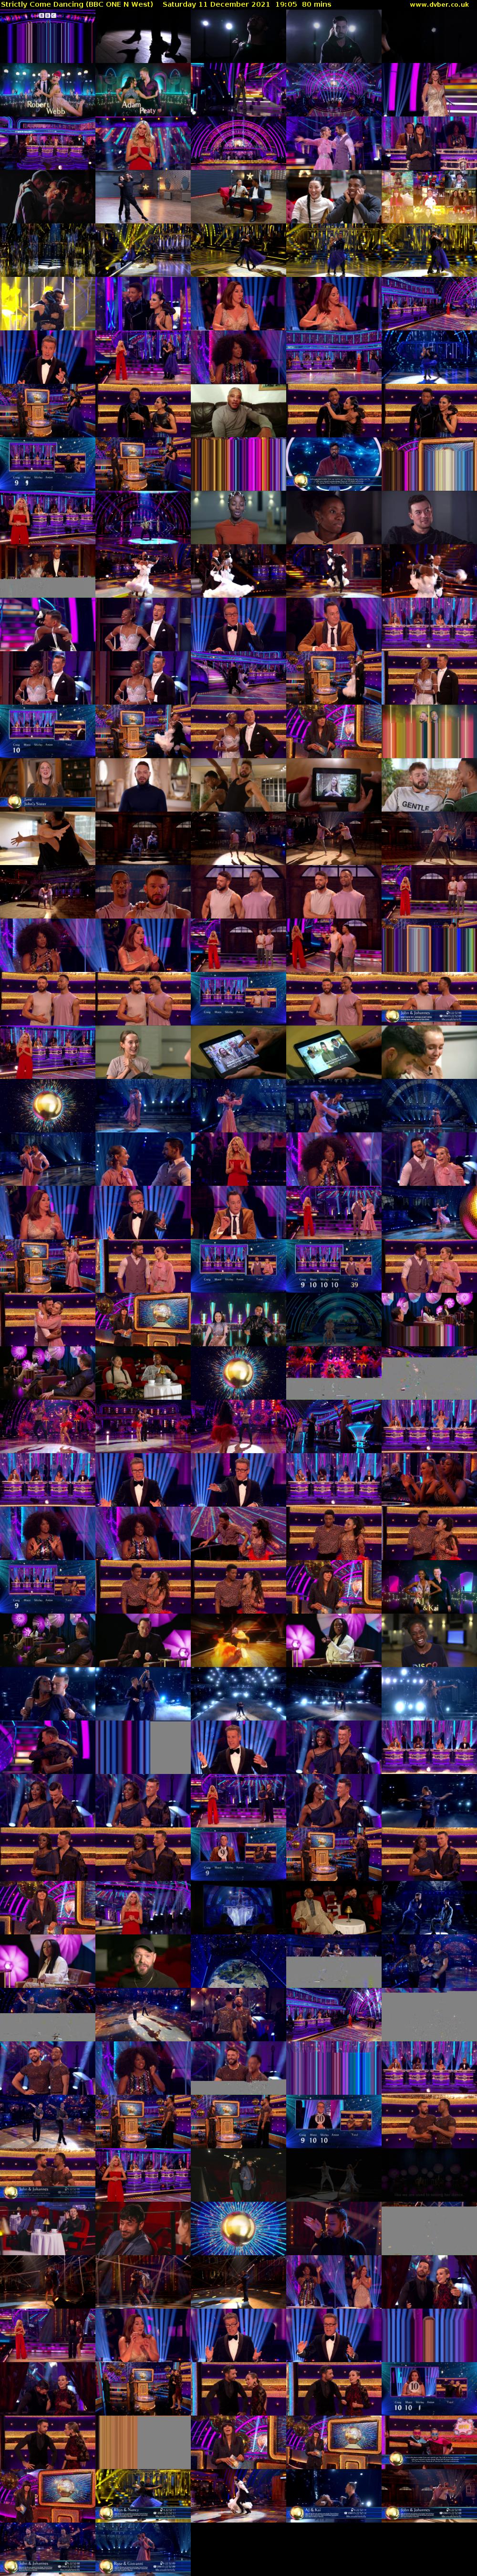 Strictly Come Dancing (BBC ONE N West) Saturday 11 December 2021 19:05 - 20:25